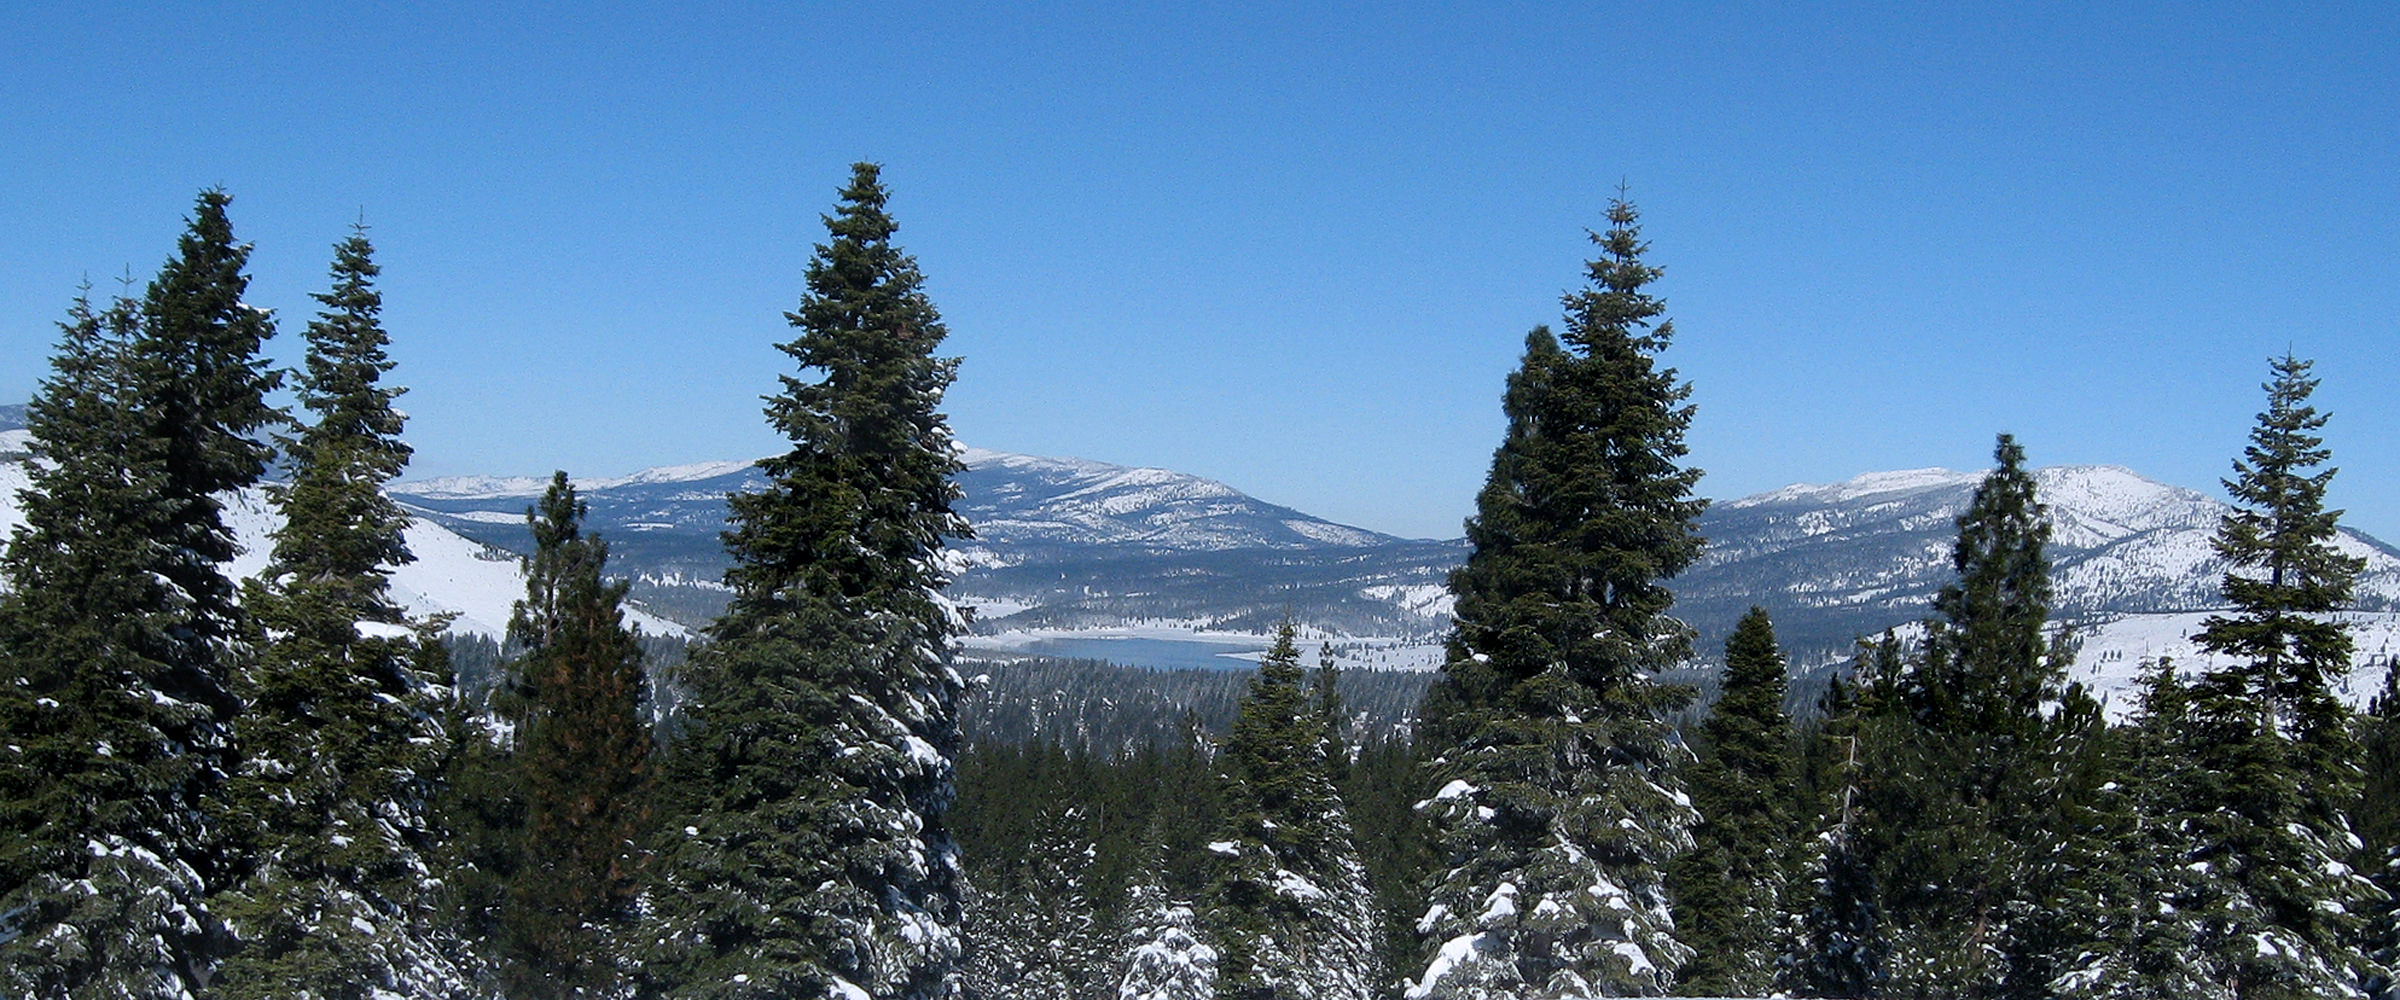 Surrounded by national forest, with beautiful views from our home, Snowlion Kennels in the Sierra